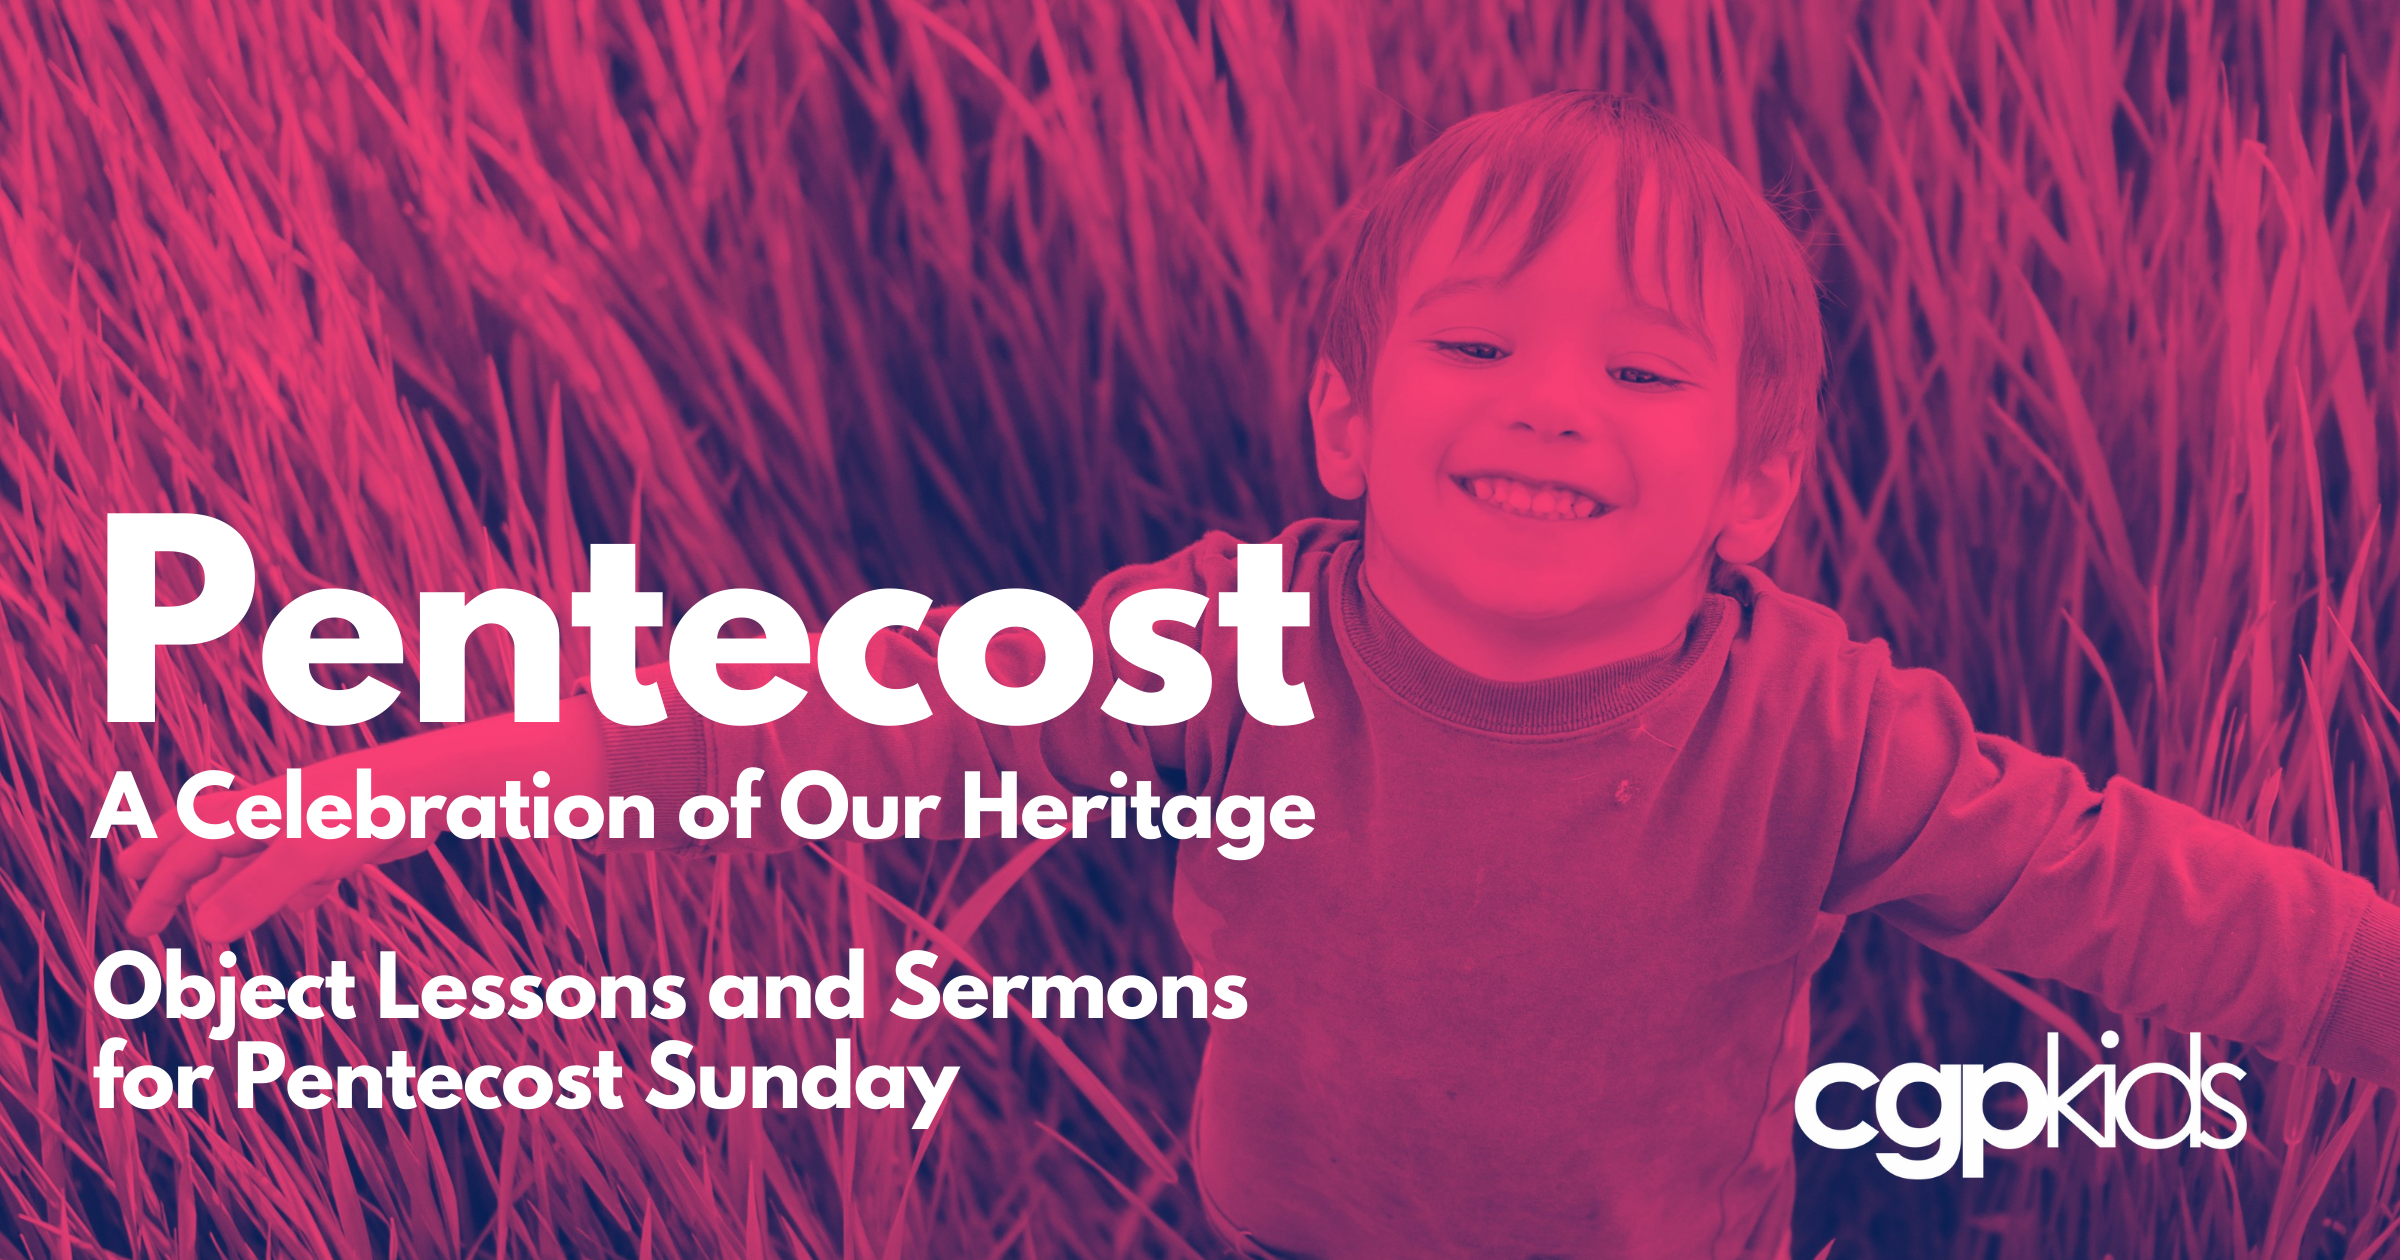 Pentecost: A Celebration of Our Heritage